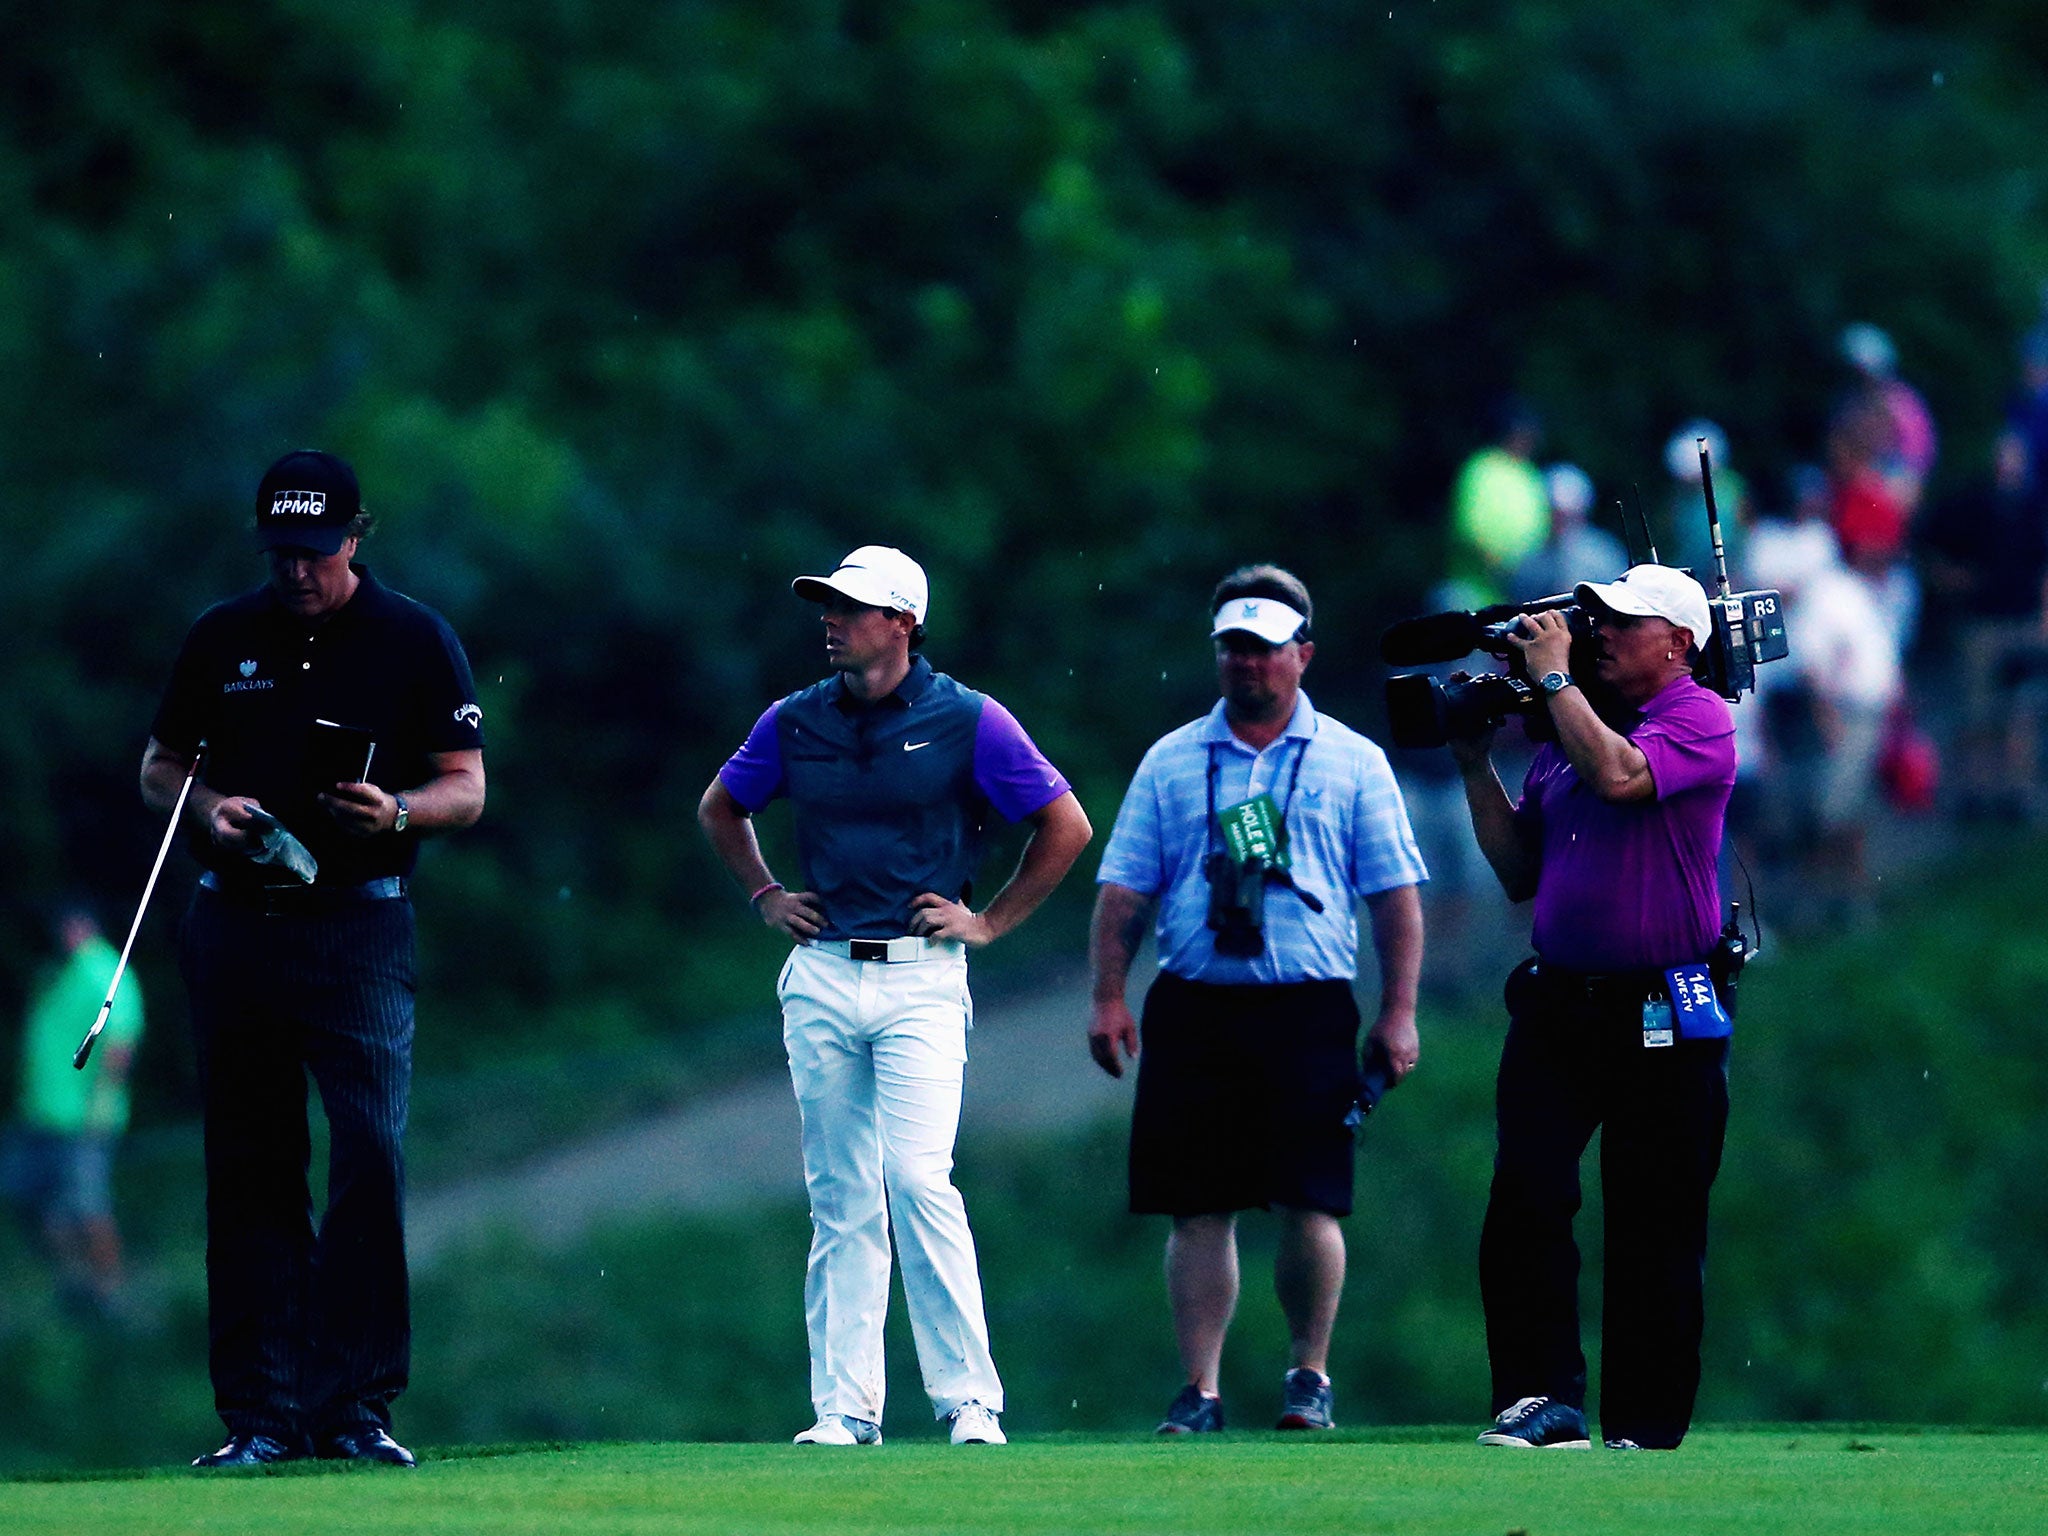 Phil Mickelson and Rory McIlroy stand together during the final round of the US PGA Championship